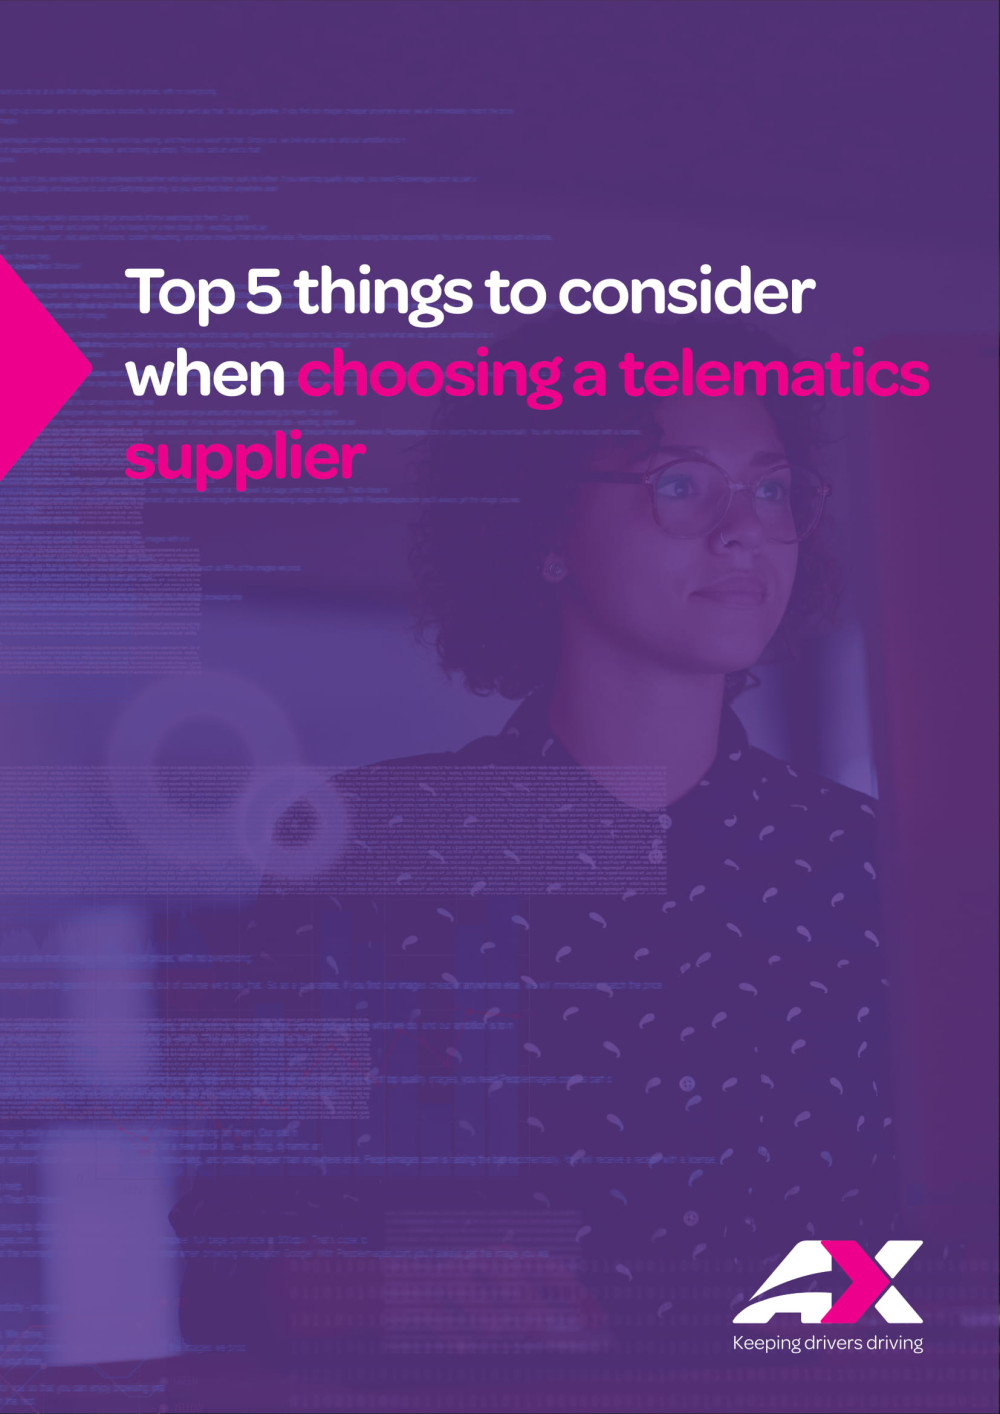 Top 5 things to consider when choosing a telematics supplier